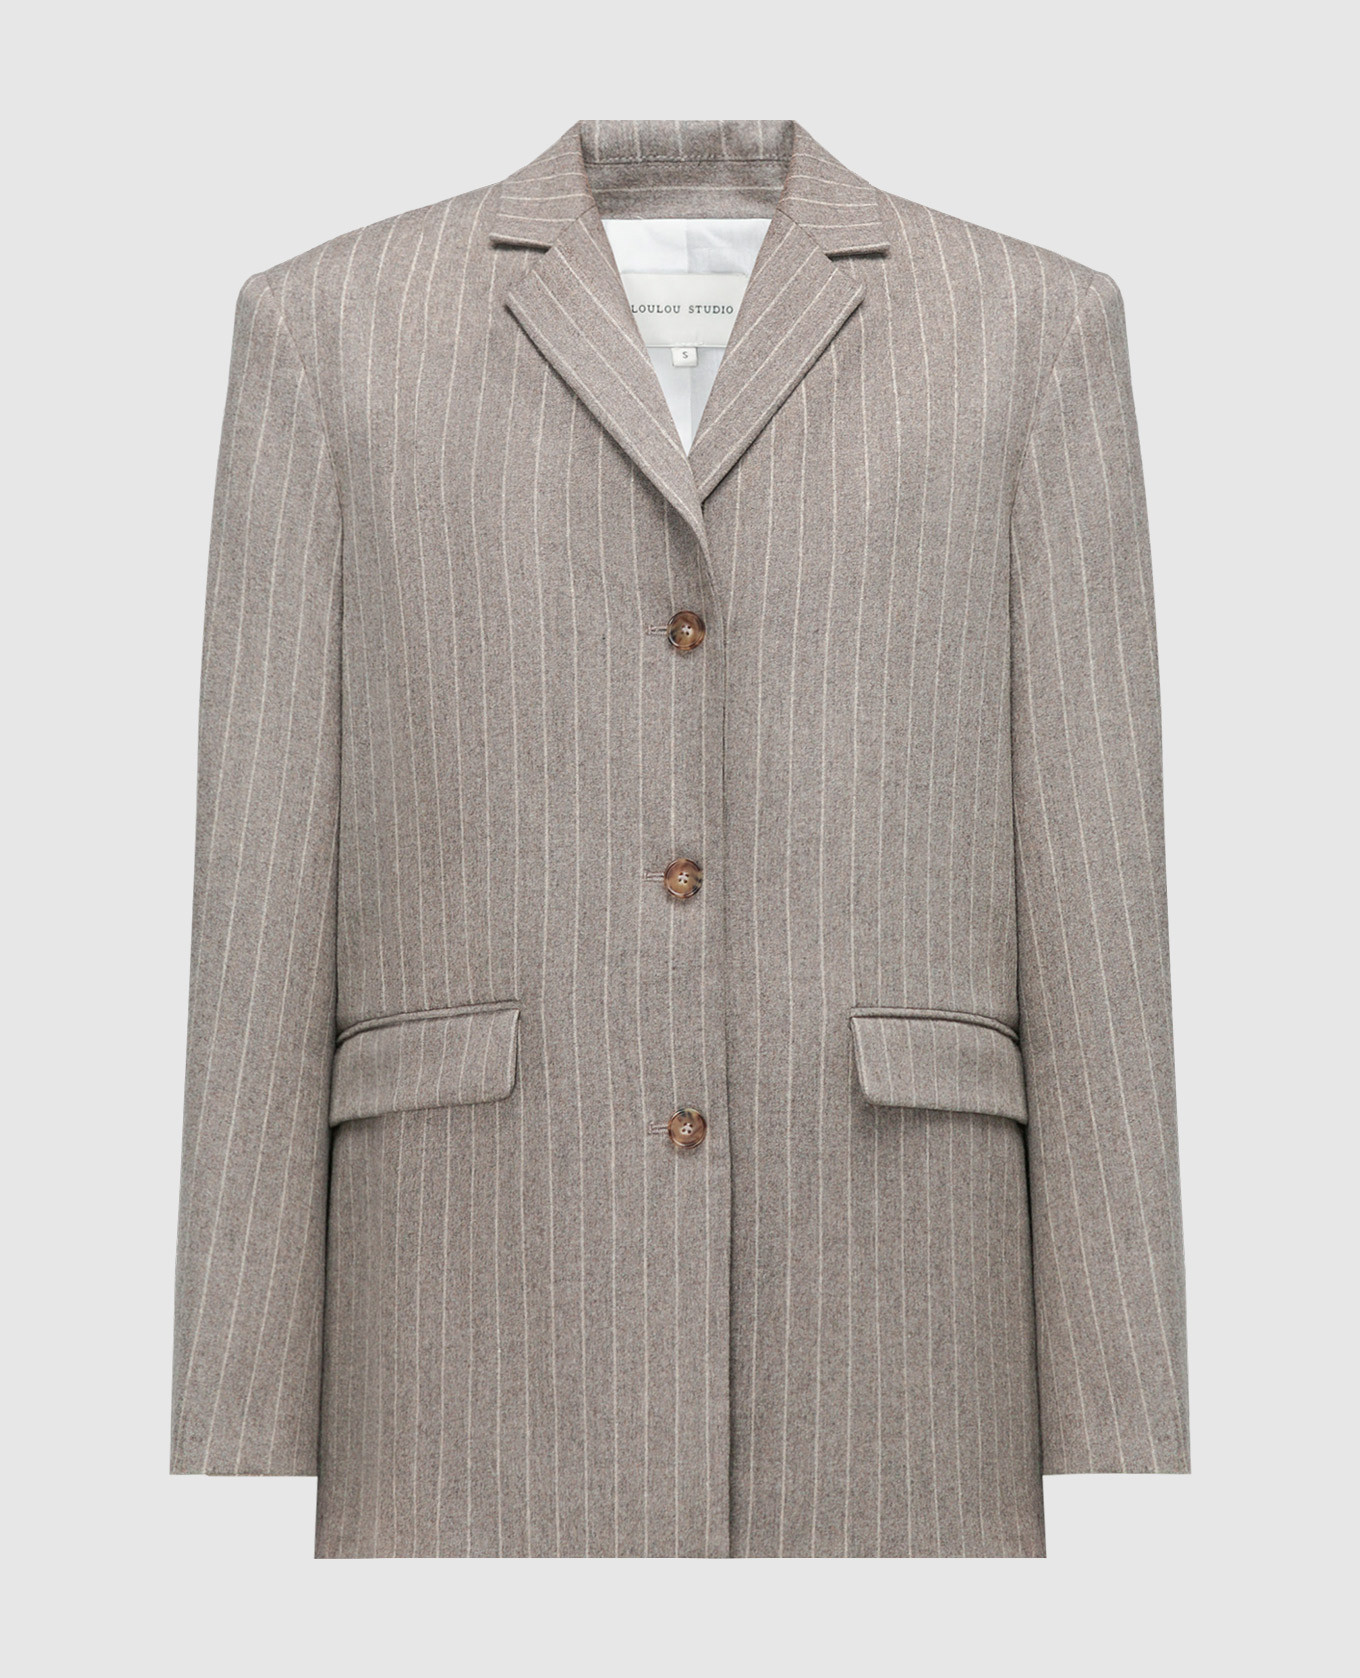 Brown wool and cashmere striped Senja jacket